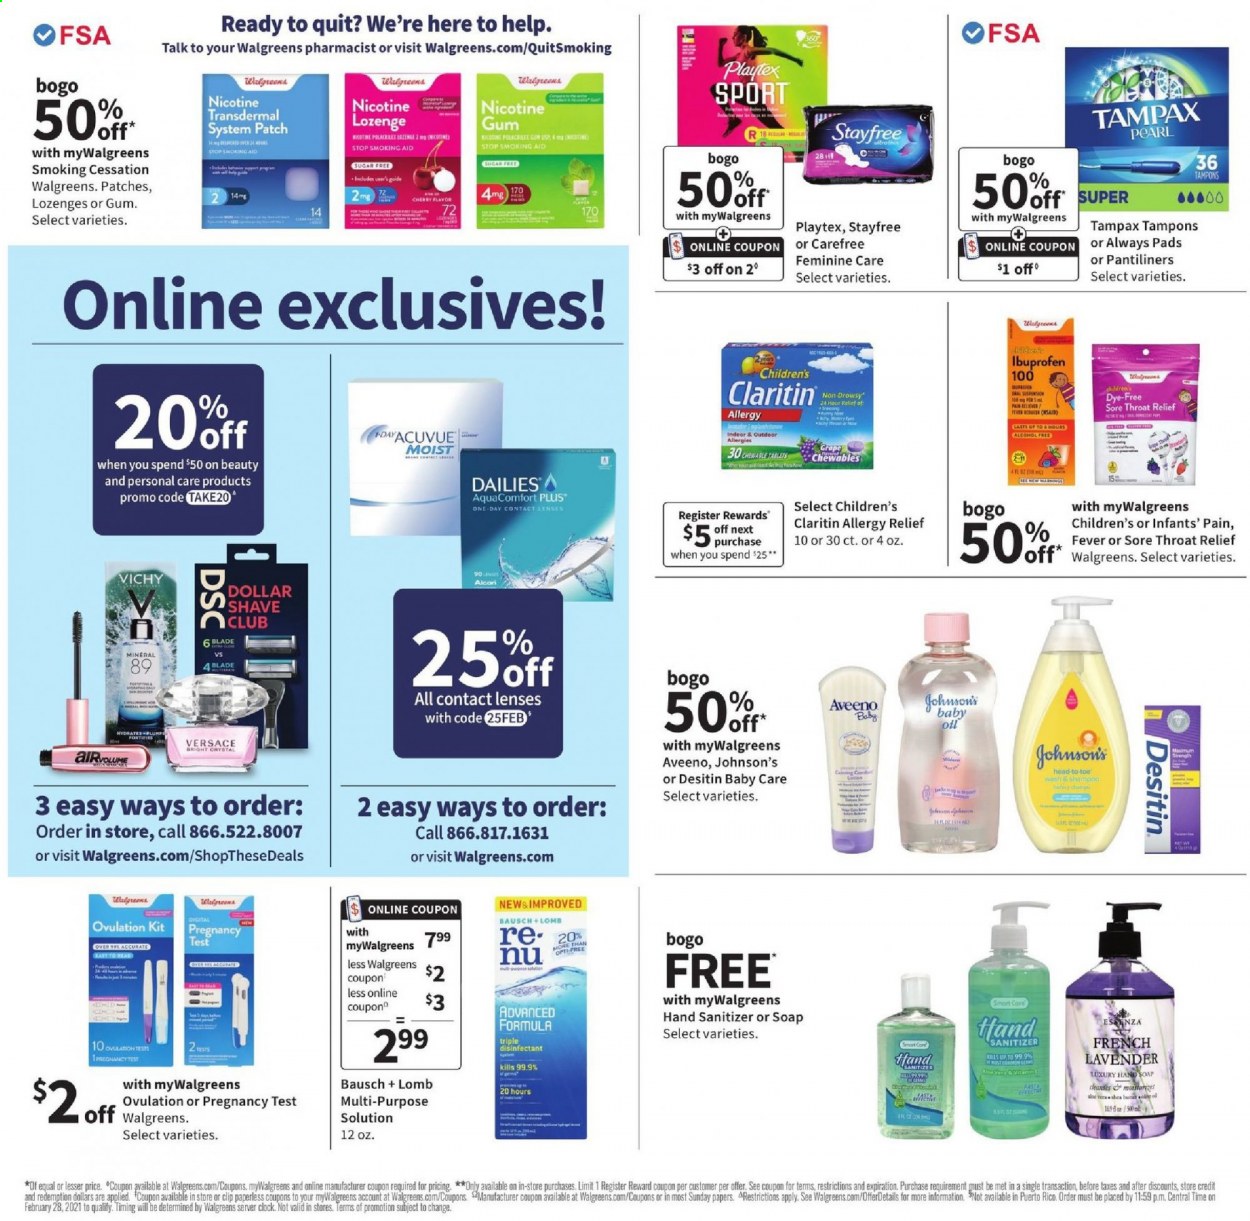 thumbnail - Walgreens Flyer - 01/31/2021 - 02/06/2021 - Sales products - Versace, Johnson's, Aveeno, baby oil, desinfection, Vichy, hand soap, soap, Stayfree, Tampax, Playtex, pantiliners, Always pads, Carefree, tampons, Dollar Shave Club, hand sanitizer, nicotine therapy, Ibuprofen, allergy relief, Desitin, lenses, contact lenses. Page 17.